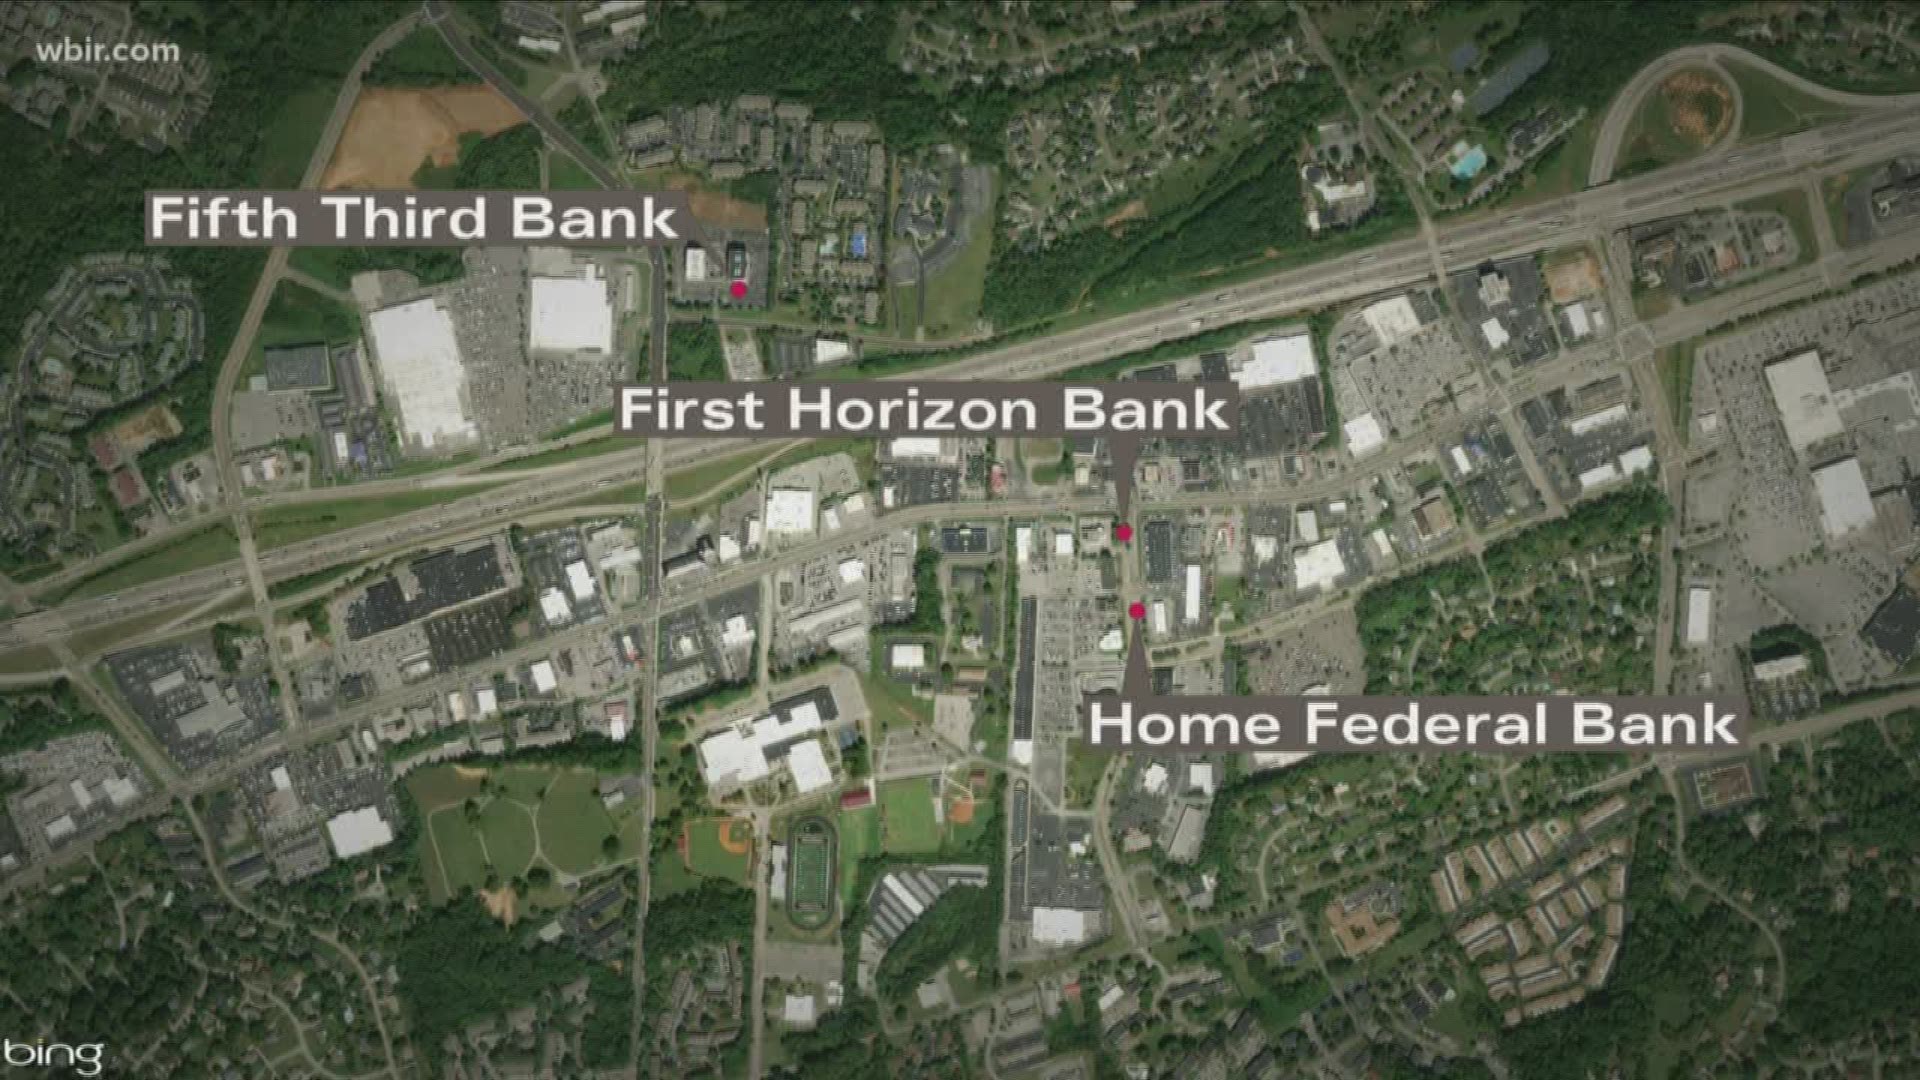 The 37-years-old man robbed the Home Federal Bank on Thursday, the First Horizon Bank on Friday and the Fifth-Third bank on Saturday.